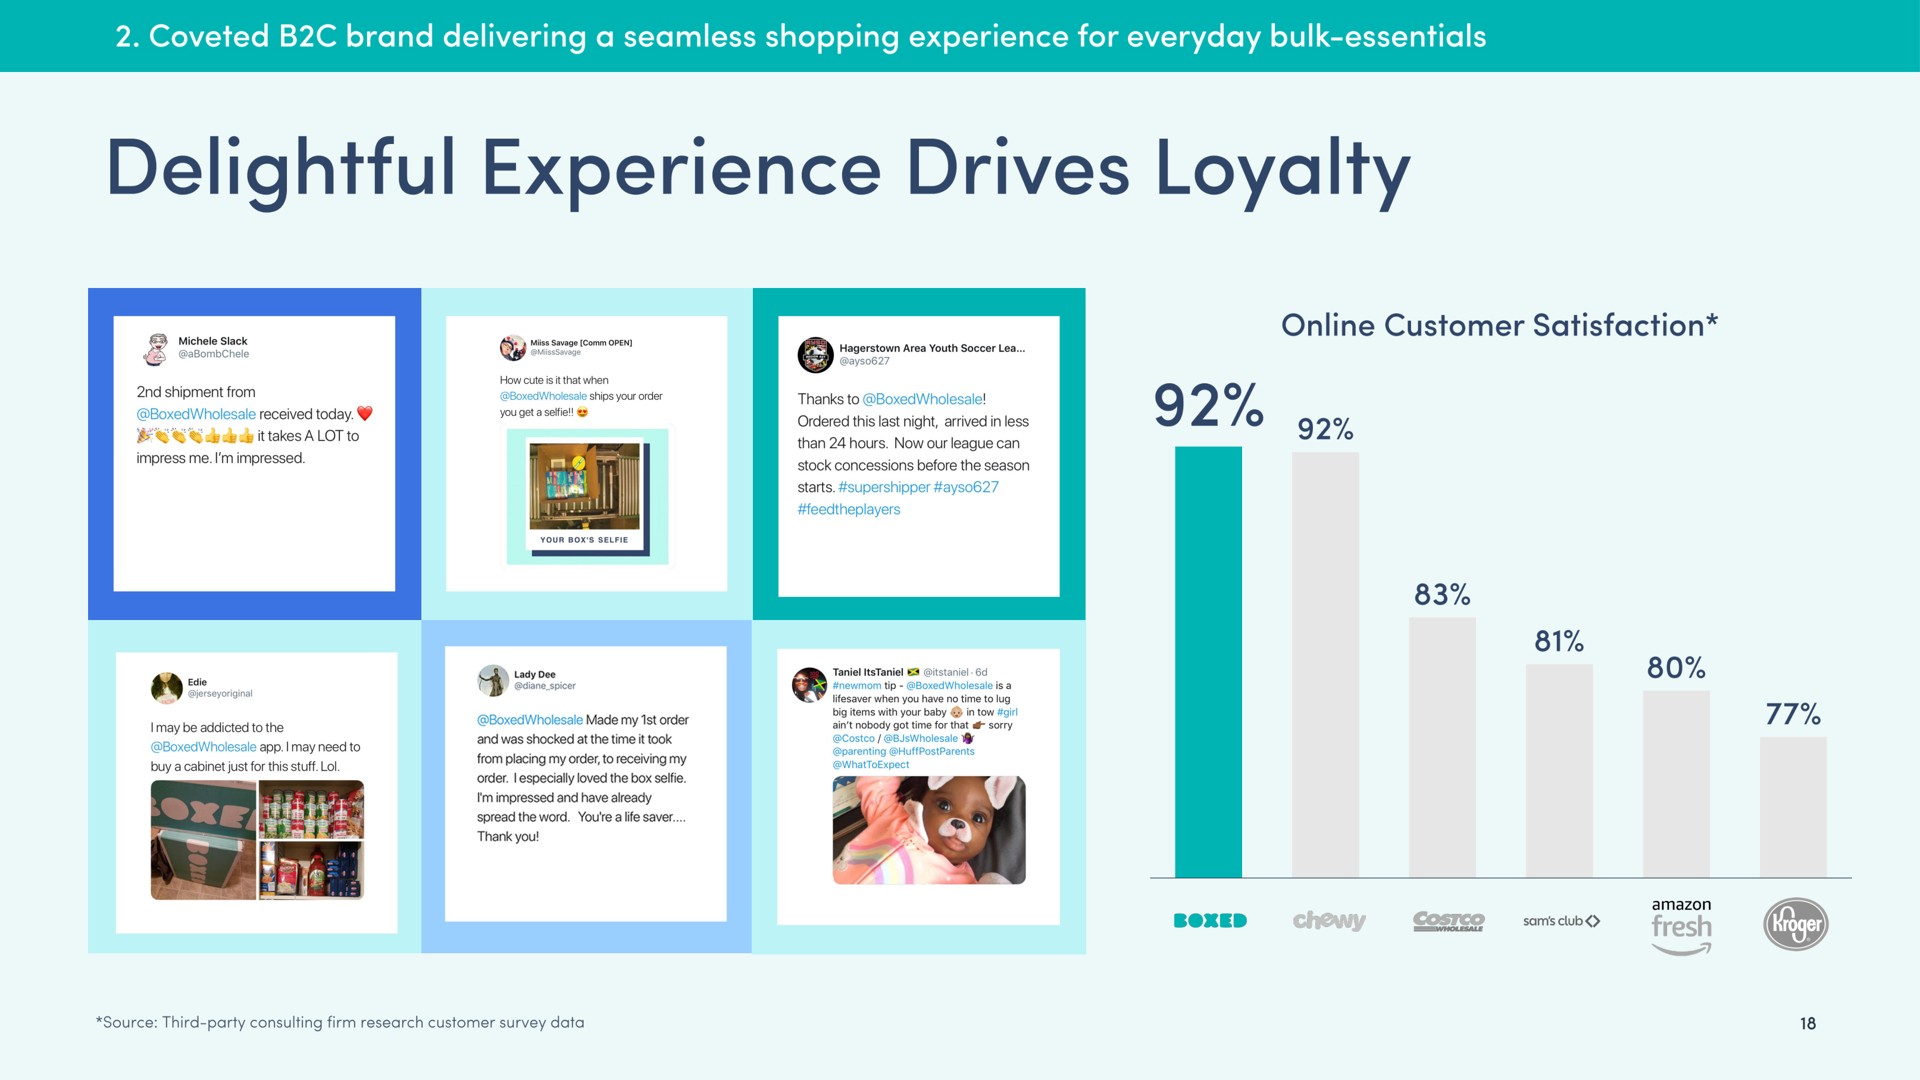 delightful experience drives loyalty | Boxed